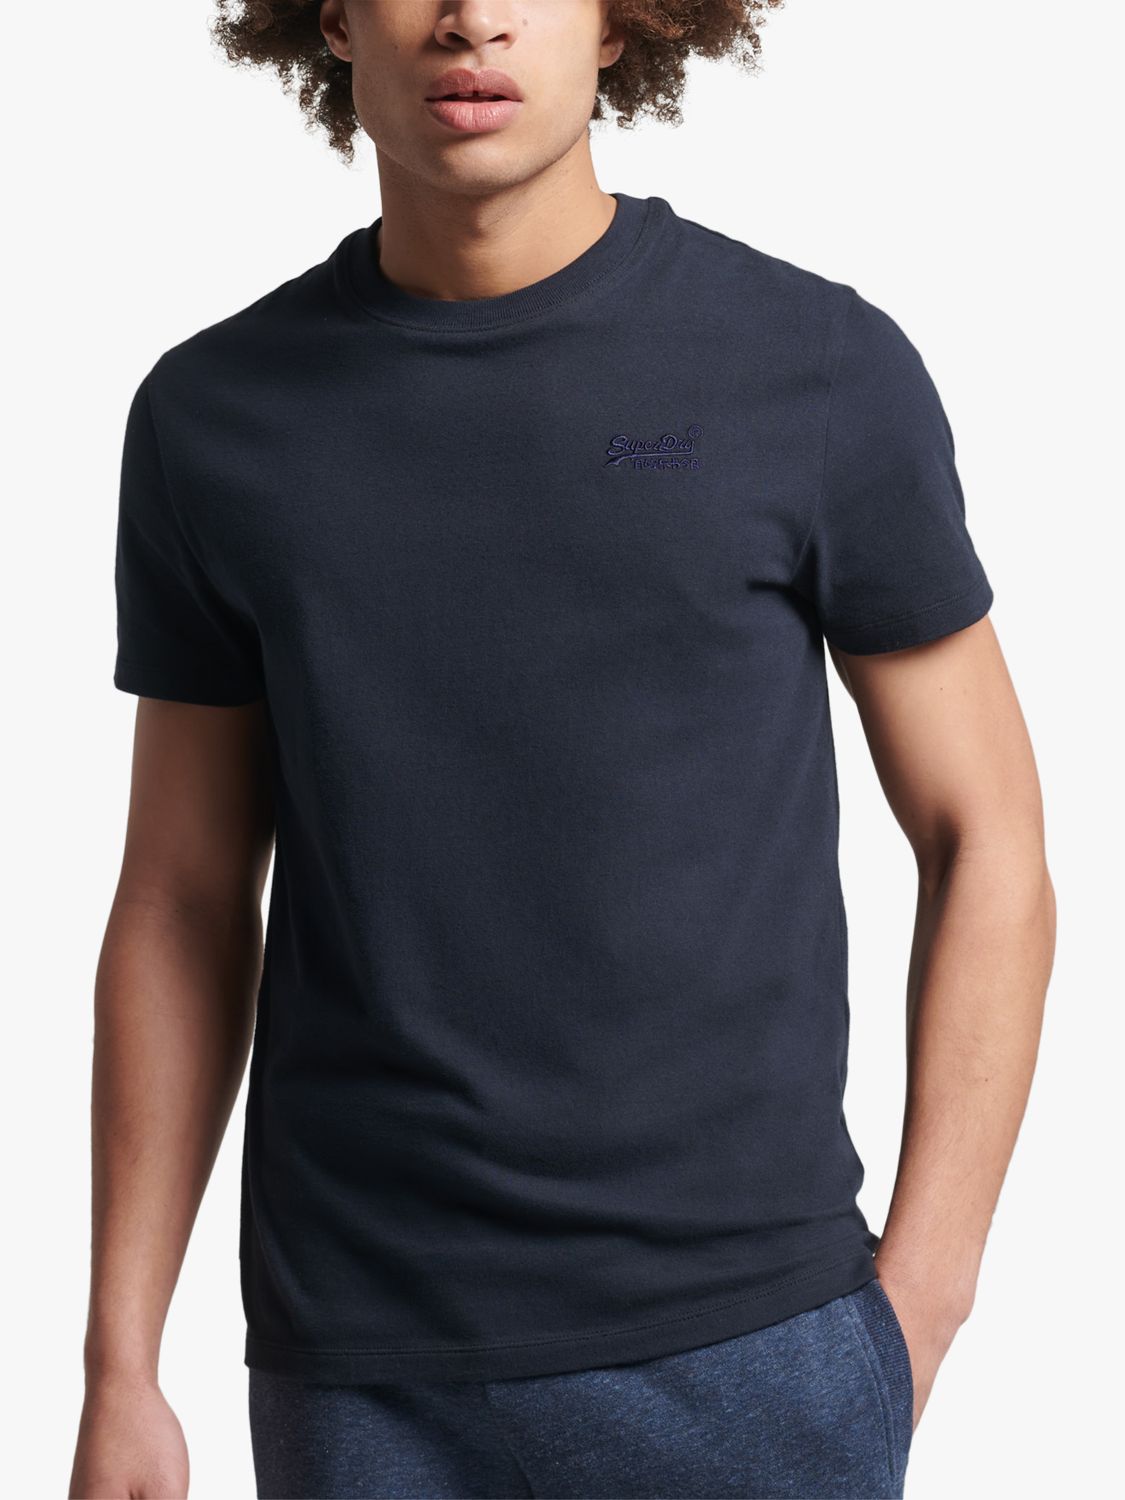 Cotton Superdry Vintage Partners John Organic Lewis Navy at T-Shirt, Eclipse Embroidered & Logo